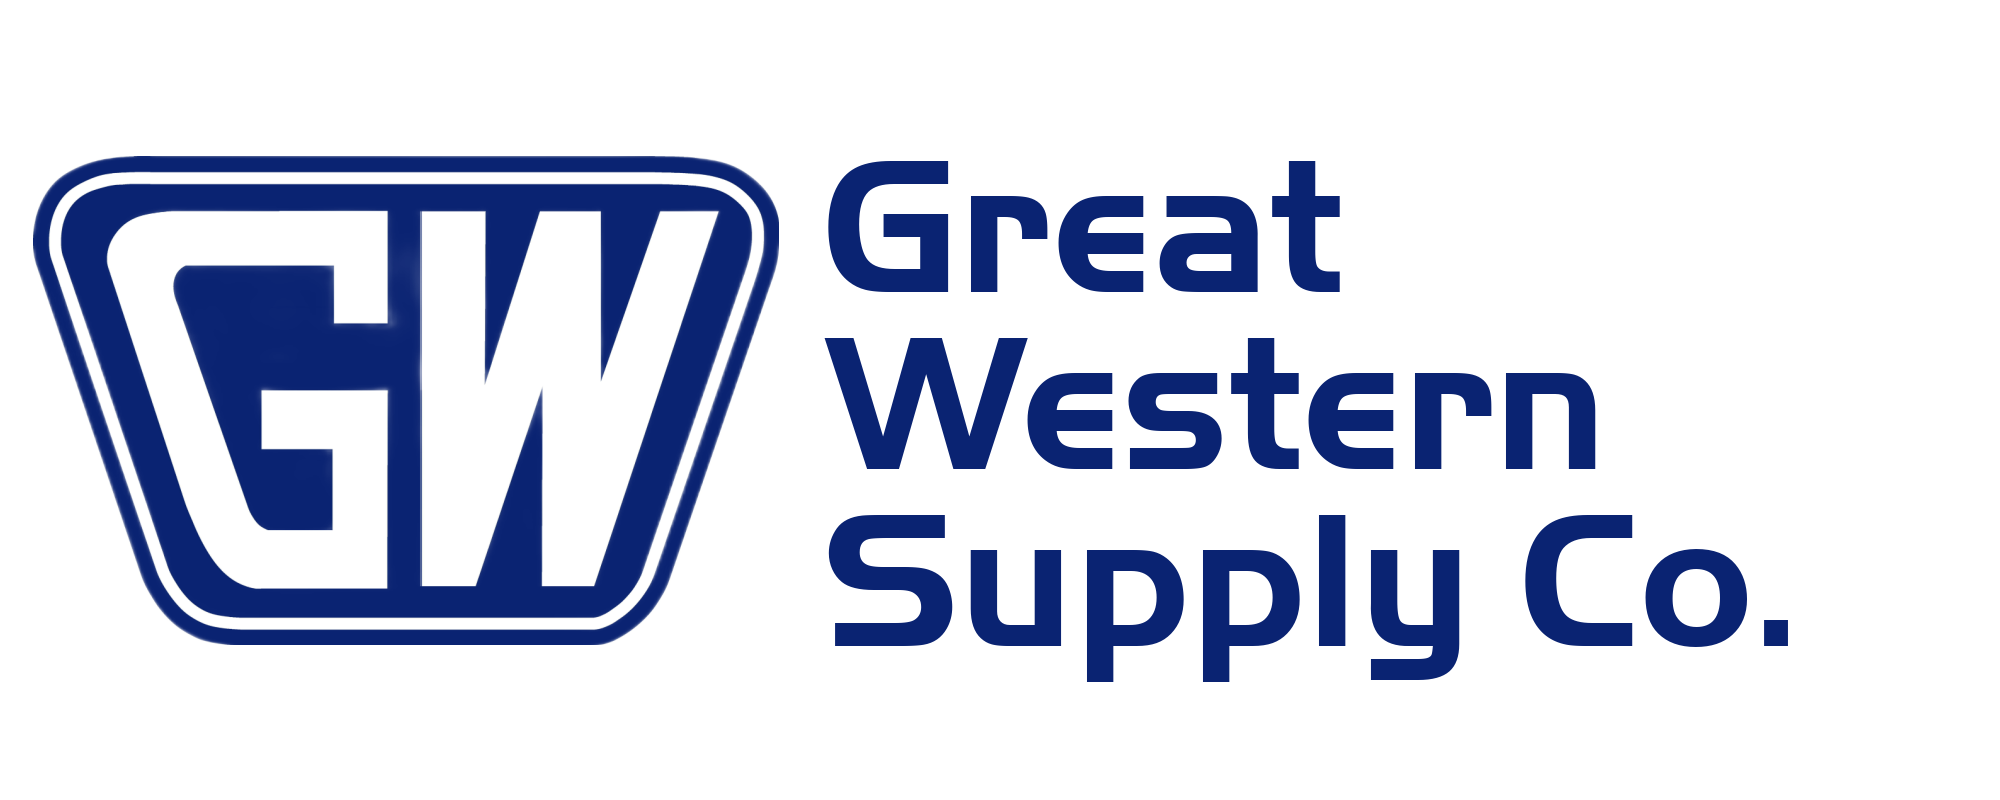 Great Western Supply Co. - homepage